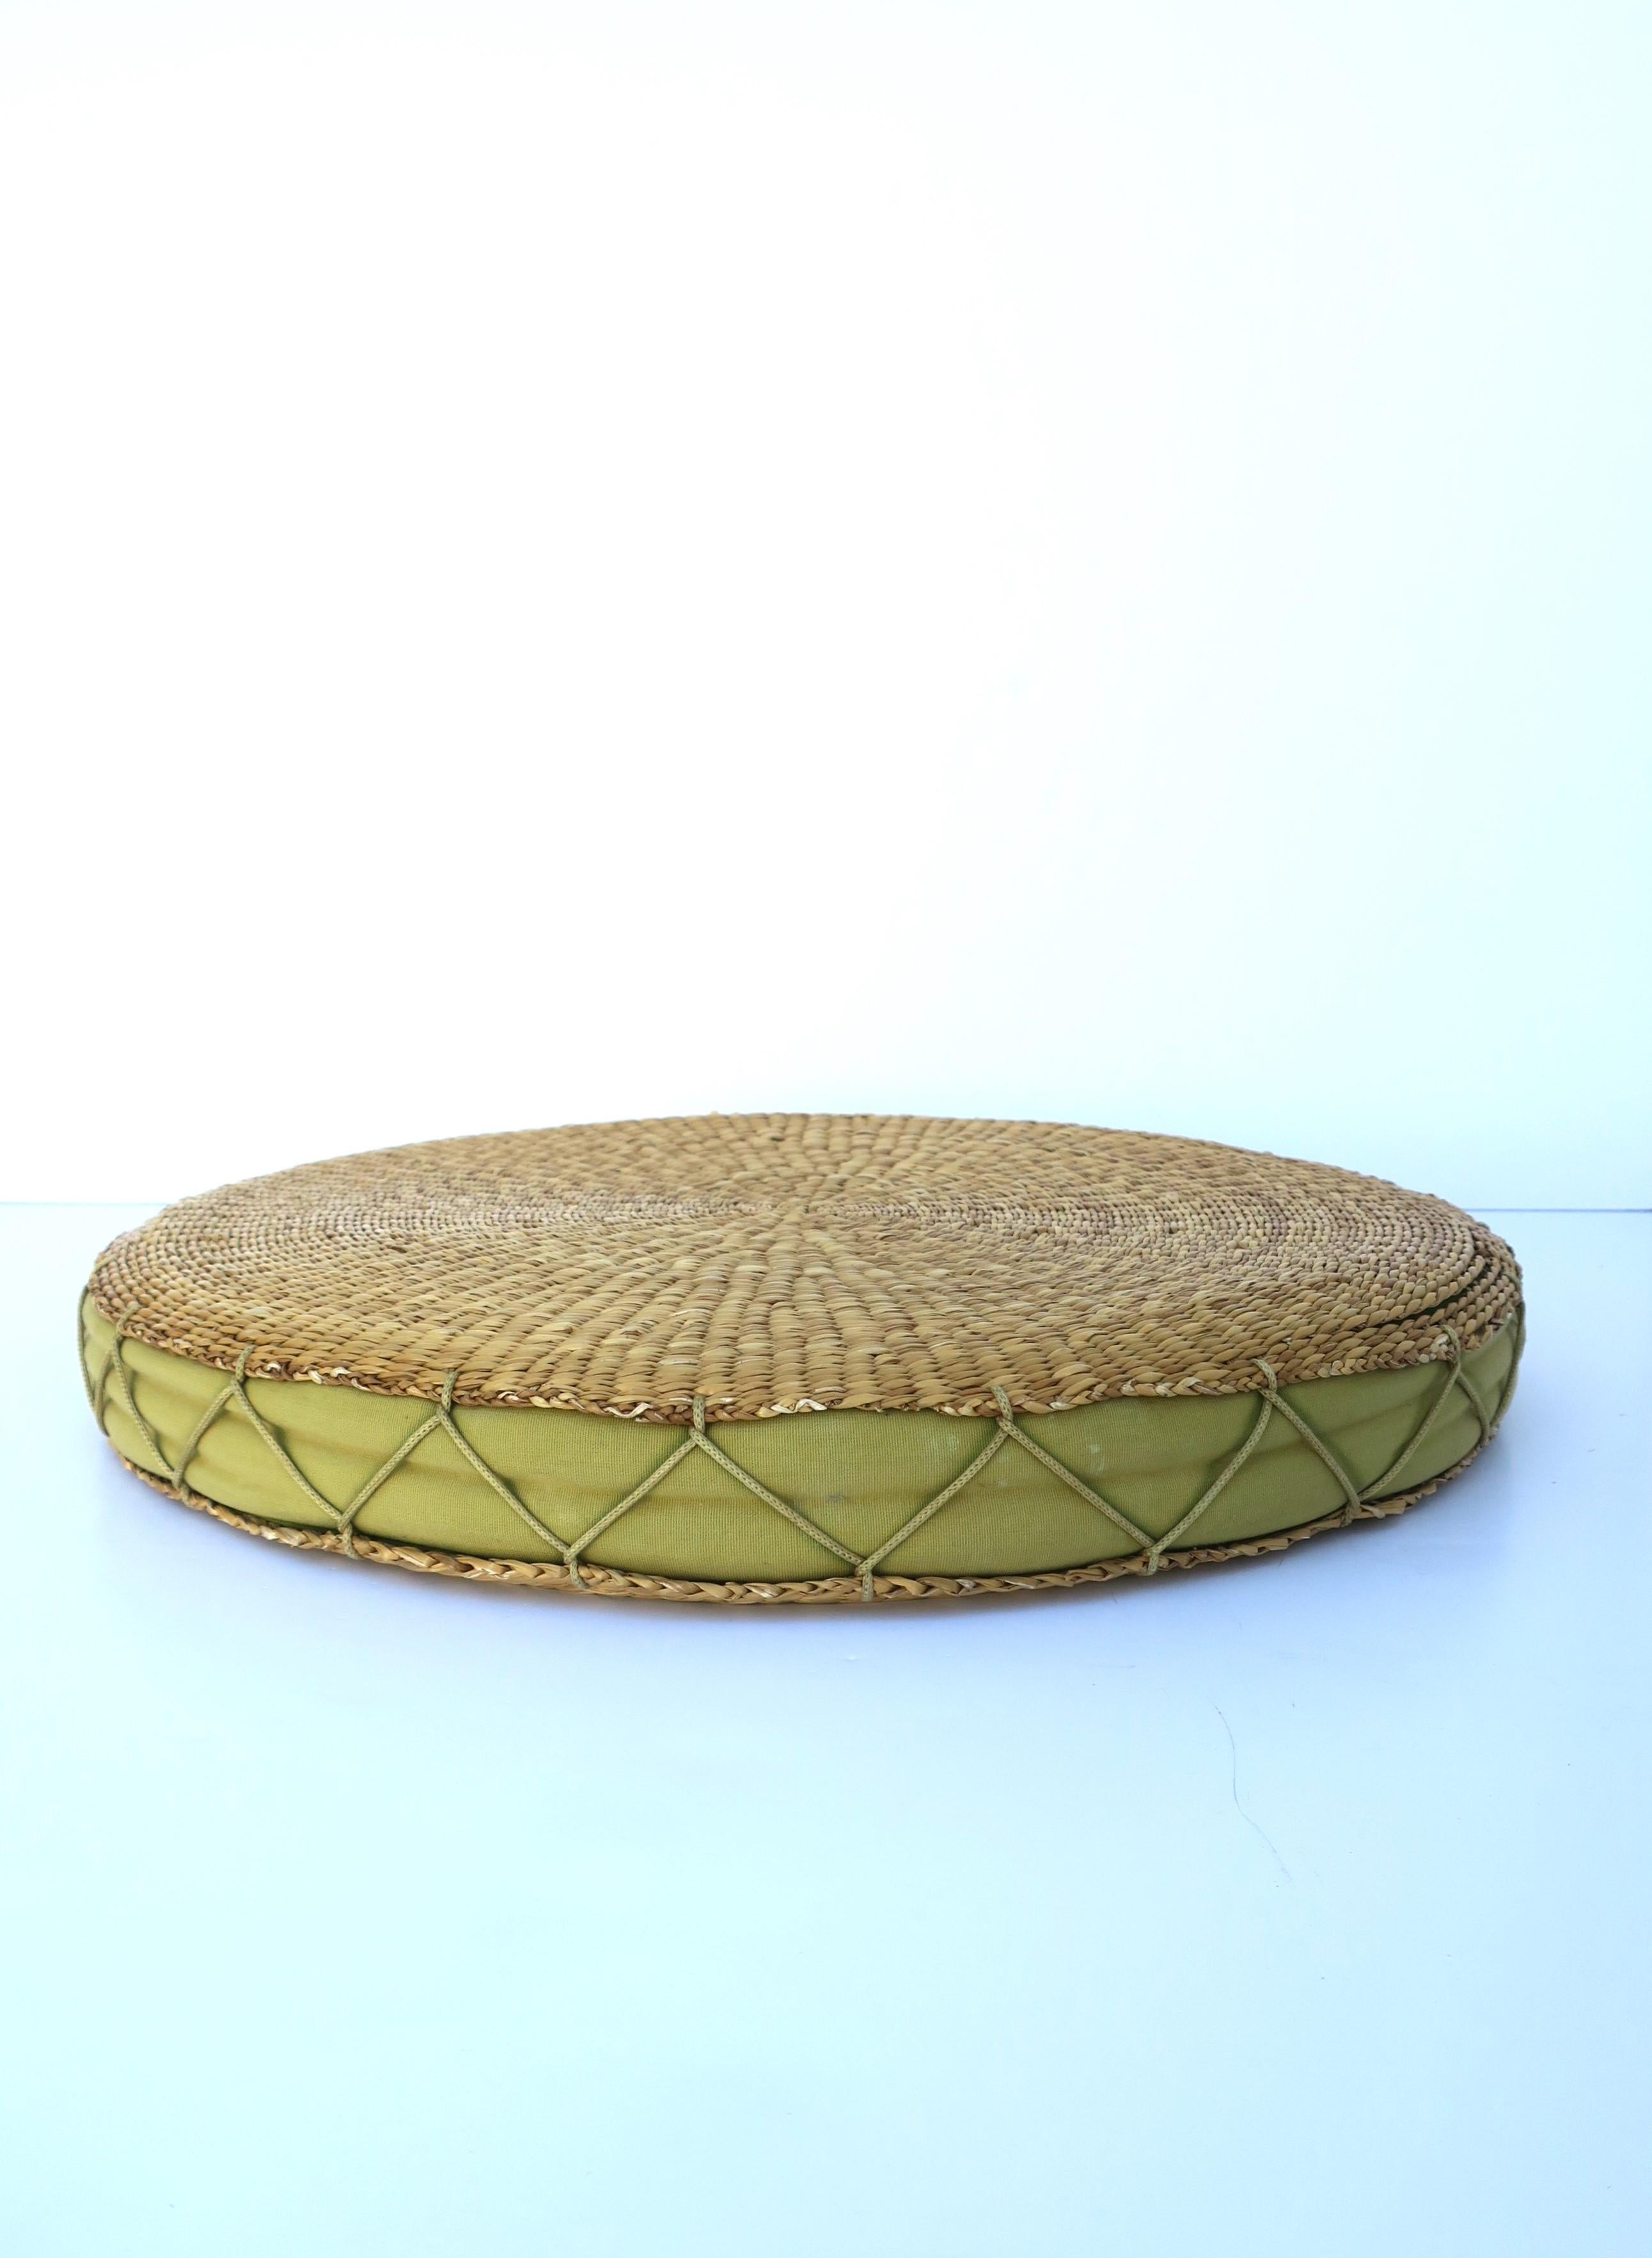 Wicker Seat or Floor Cushion, Green and Tan In Good Condition For Sale In New York, NY